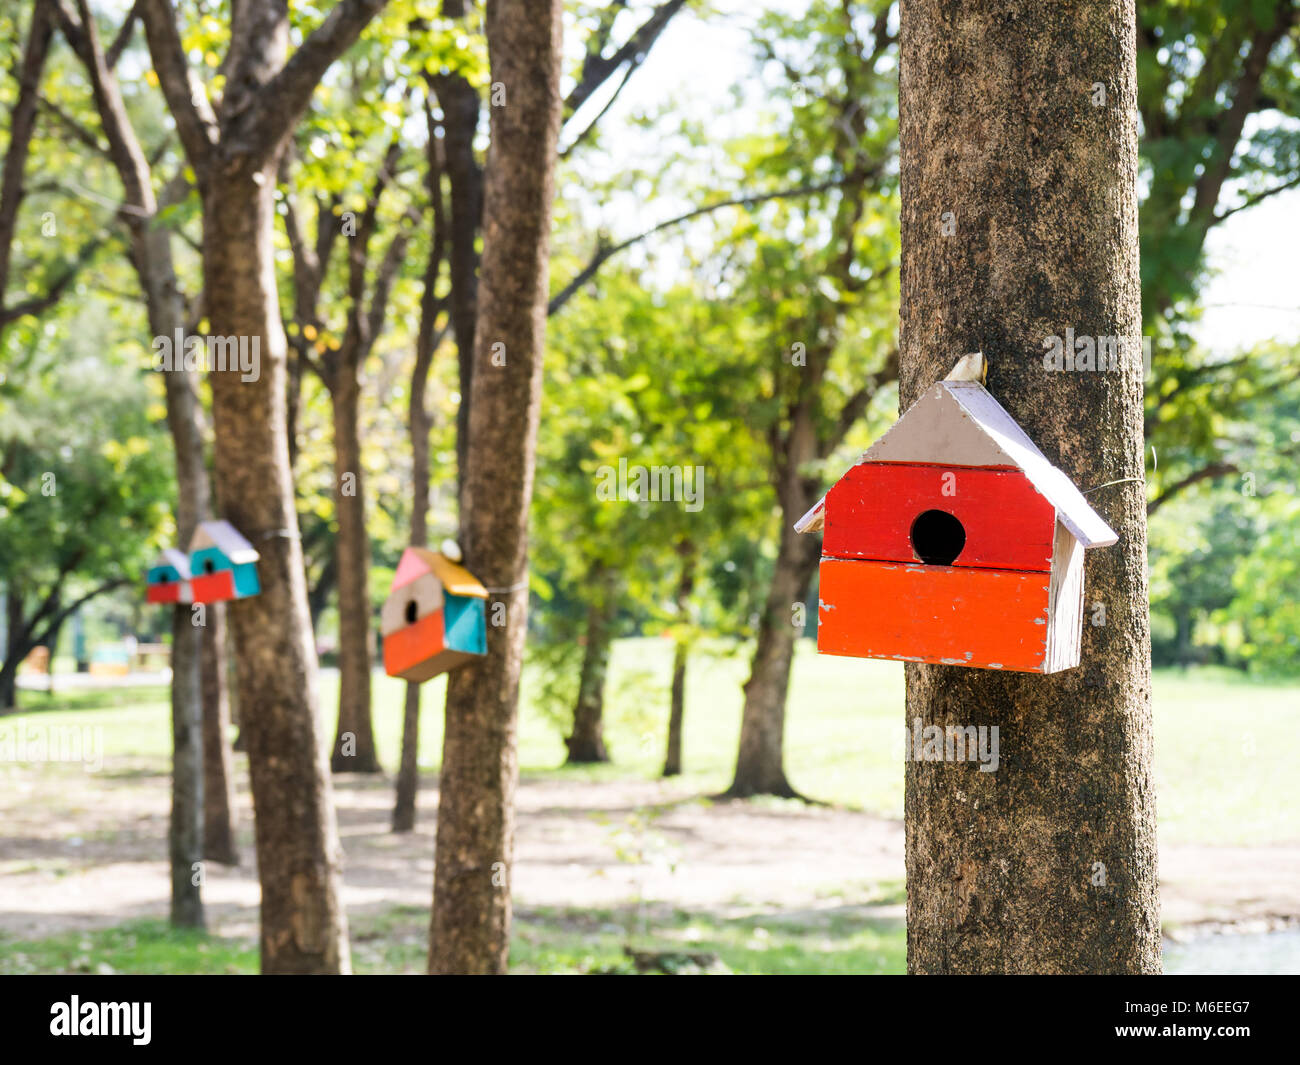 Colorful Bird Houses in the park Hanging on a tree, The bird house was placed at various points.birdhouse forest with many brightly colored bird house Stock Photo